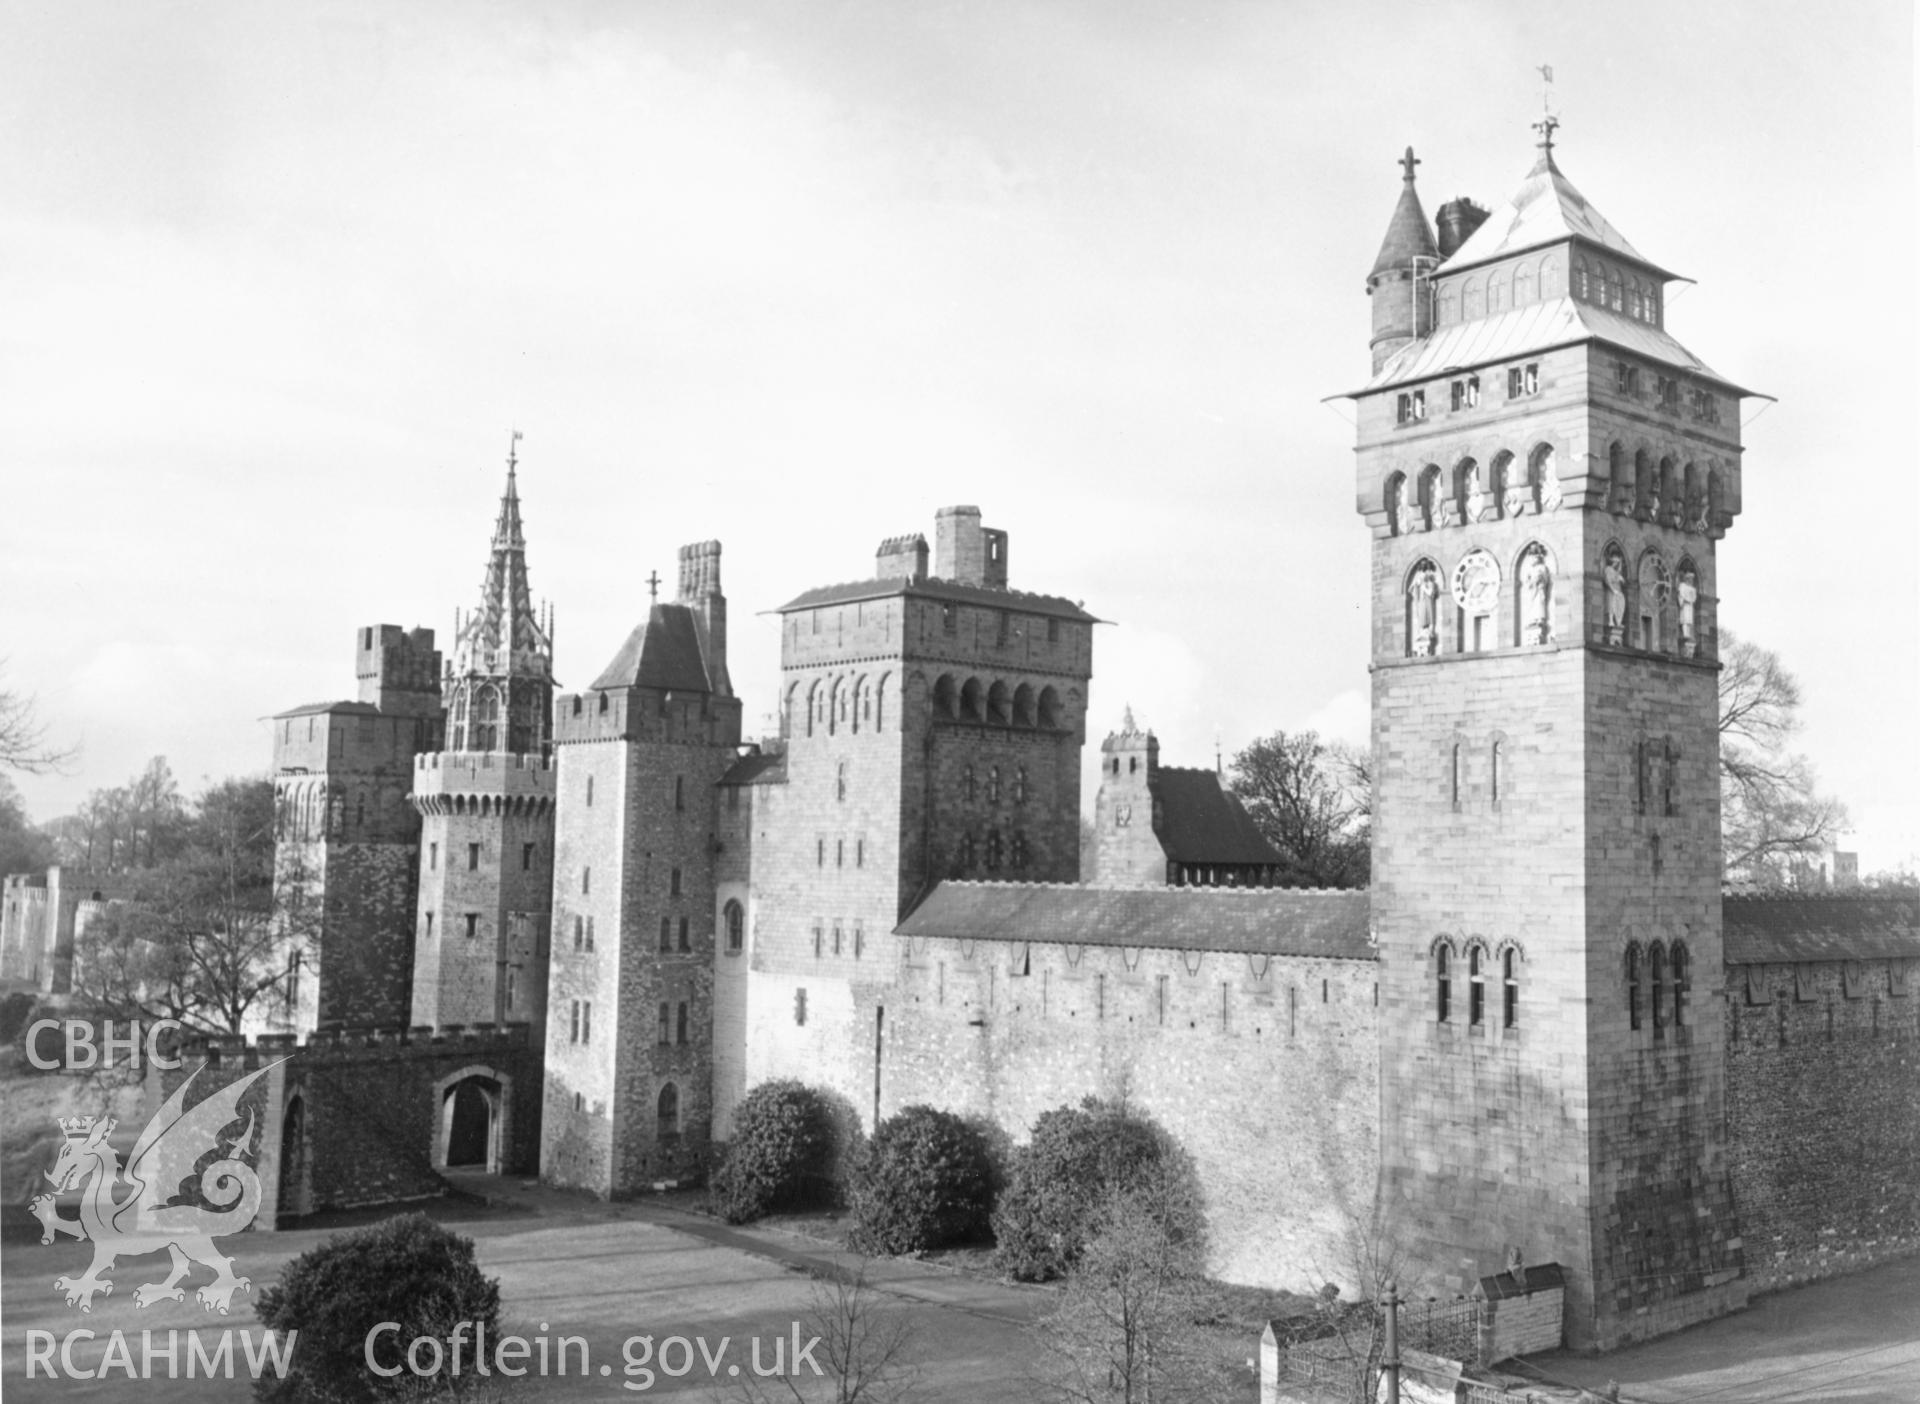 1 b/w print showing view of Cardiff castle, collated by the former Central Office of Information.